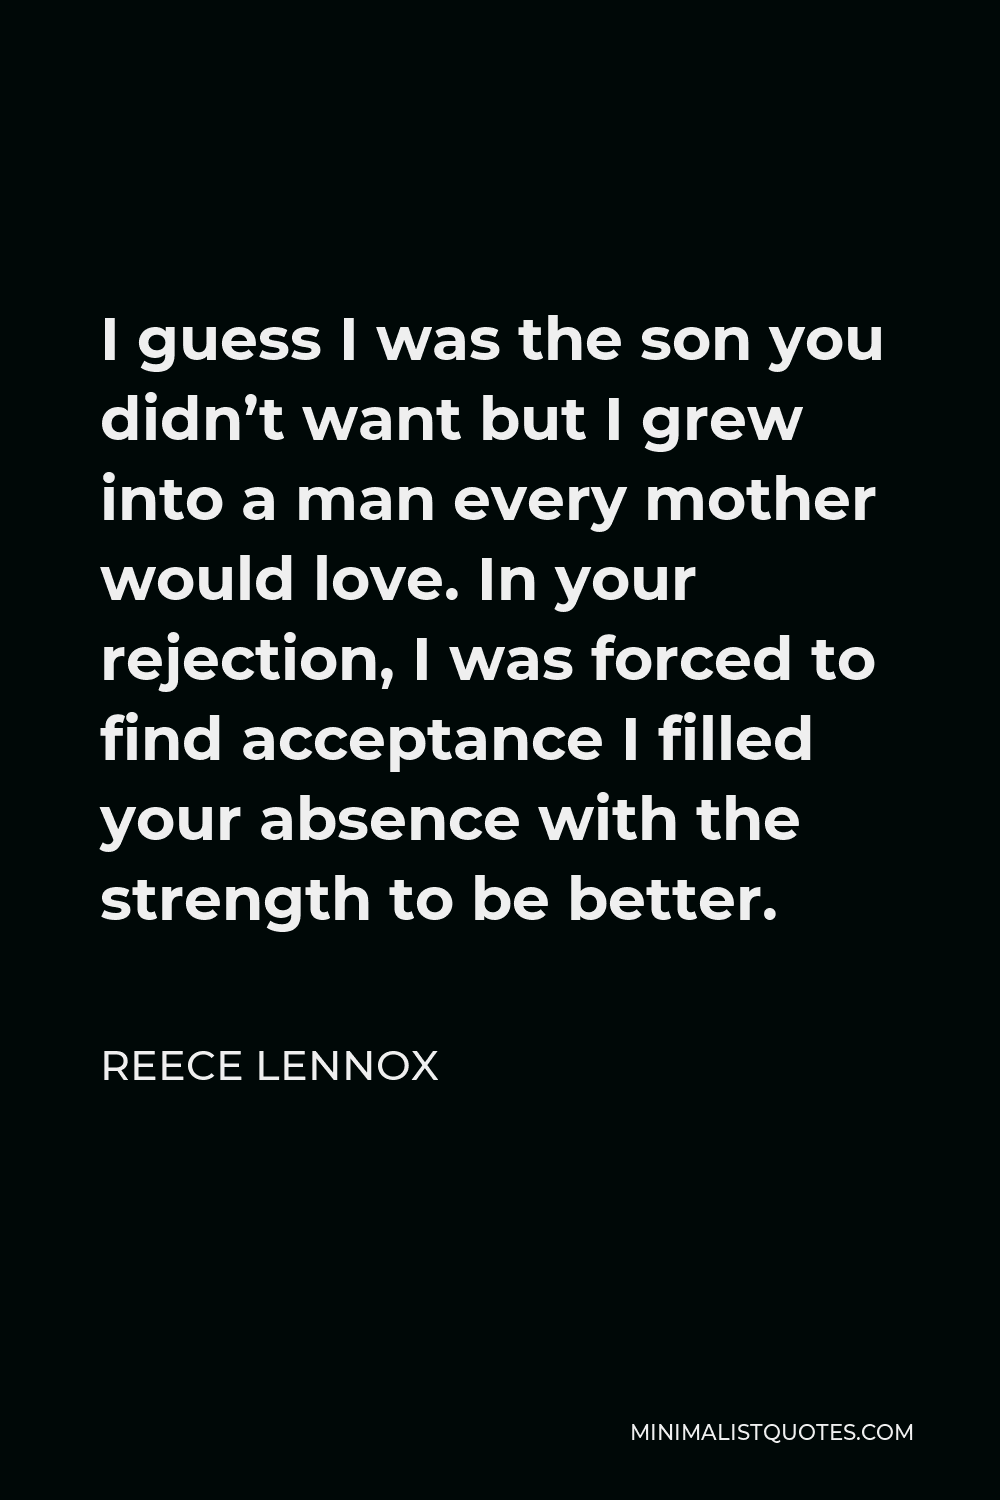 Reece Lennox Quote - I guess I was the son you didn’t want but I grew into a man every mother would love. In your rejection, I was forced to find acceptance I filled your absence with the strength to be better.